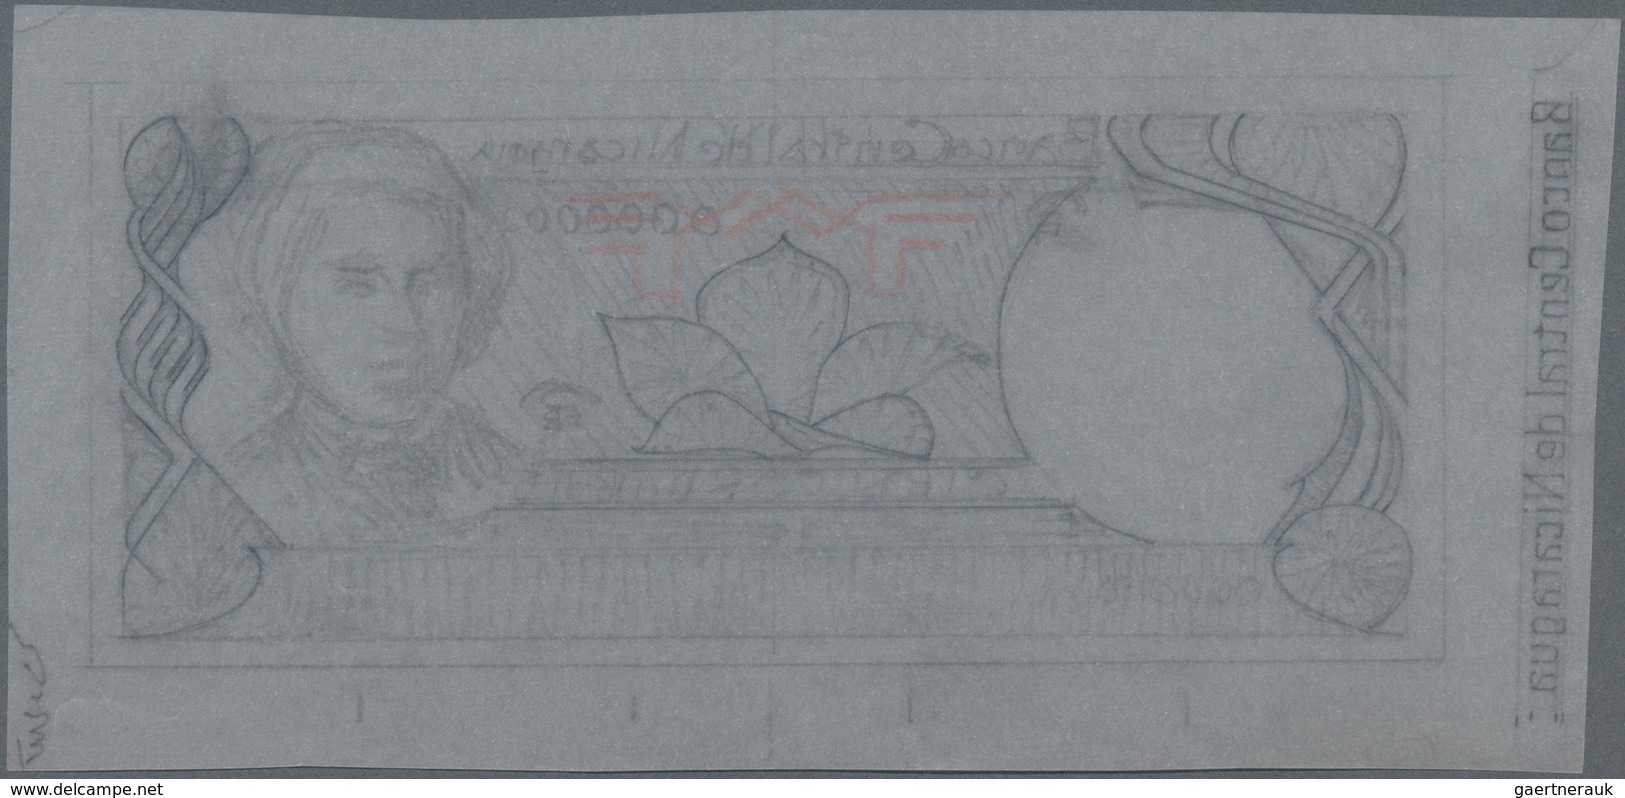 Nicaragua: Hand Drawn Pencil Sketch For A Cordobas Banknote On Parchment Paper With A Design For The - Nicaragua